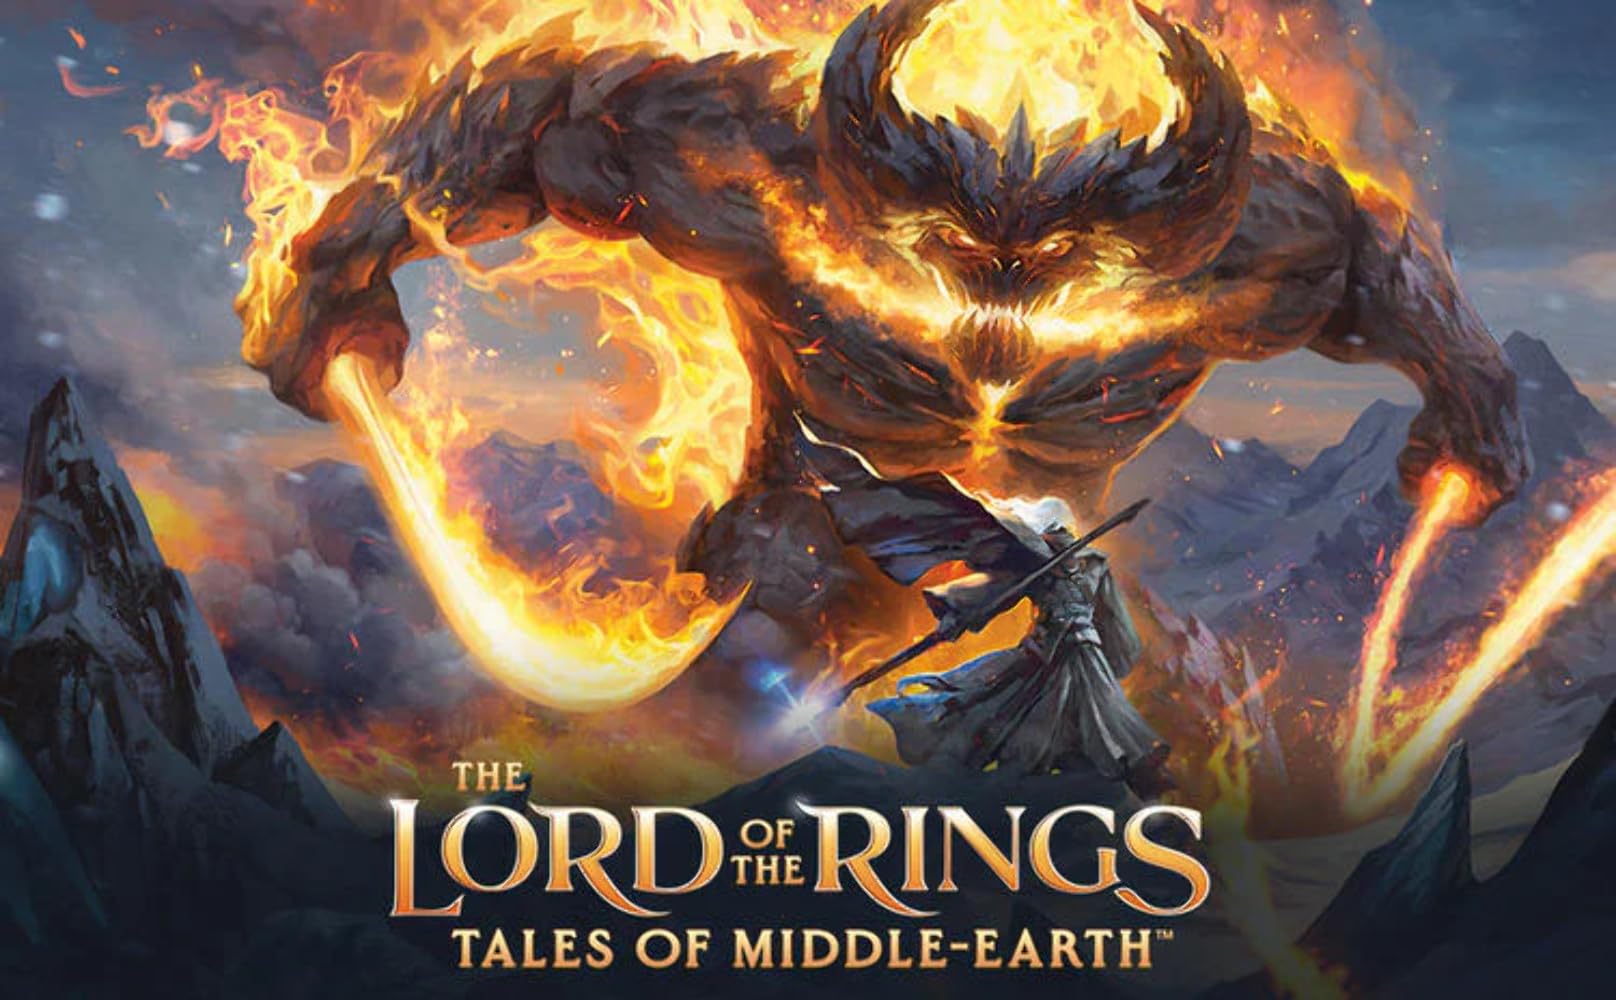 Magic: The Gathering - Lord of the Rings: Tales of Middle-earth Jumpstart Booster (1 PACK)